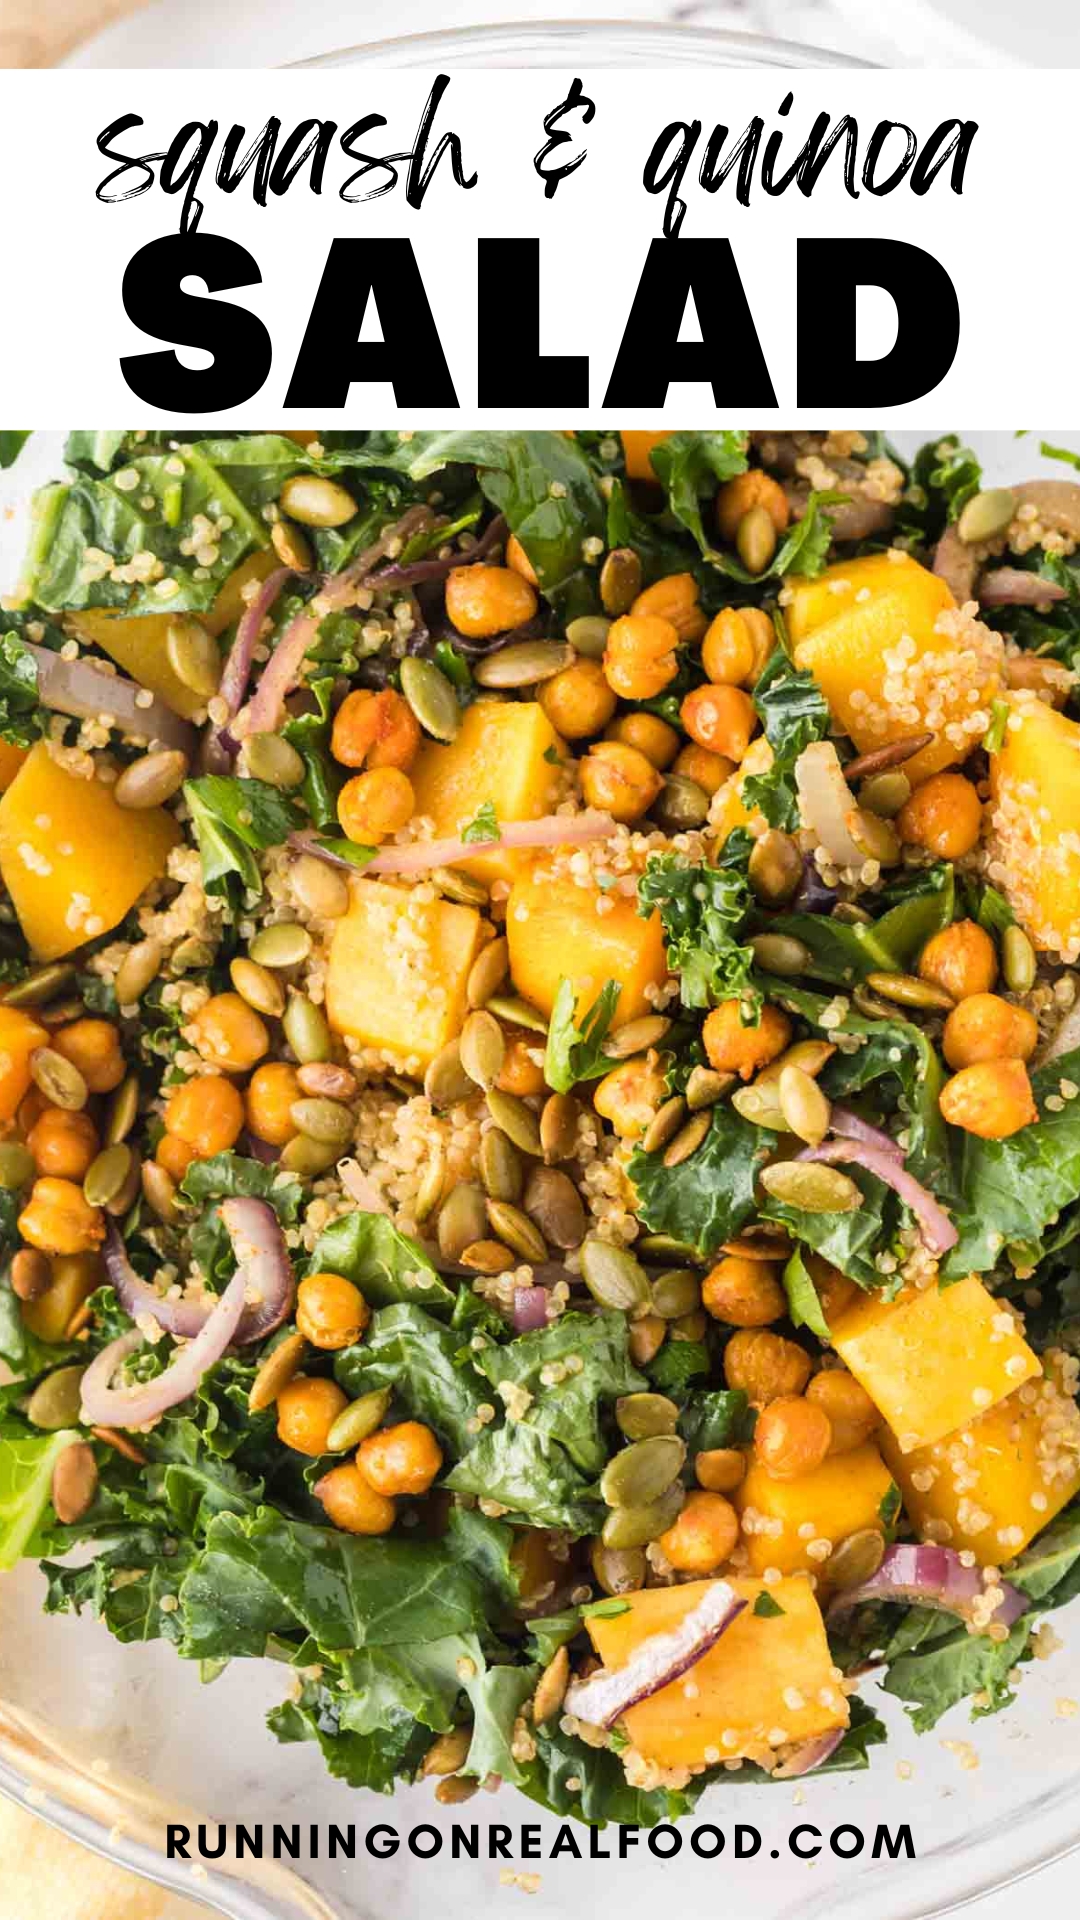 Butternut Squash Quinoa Salad with Kale - Running on Real Food